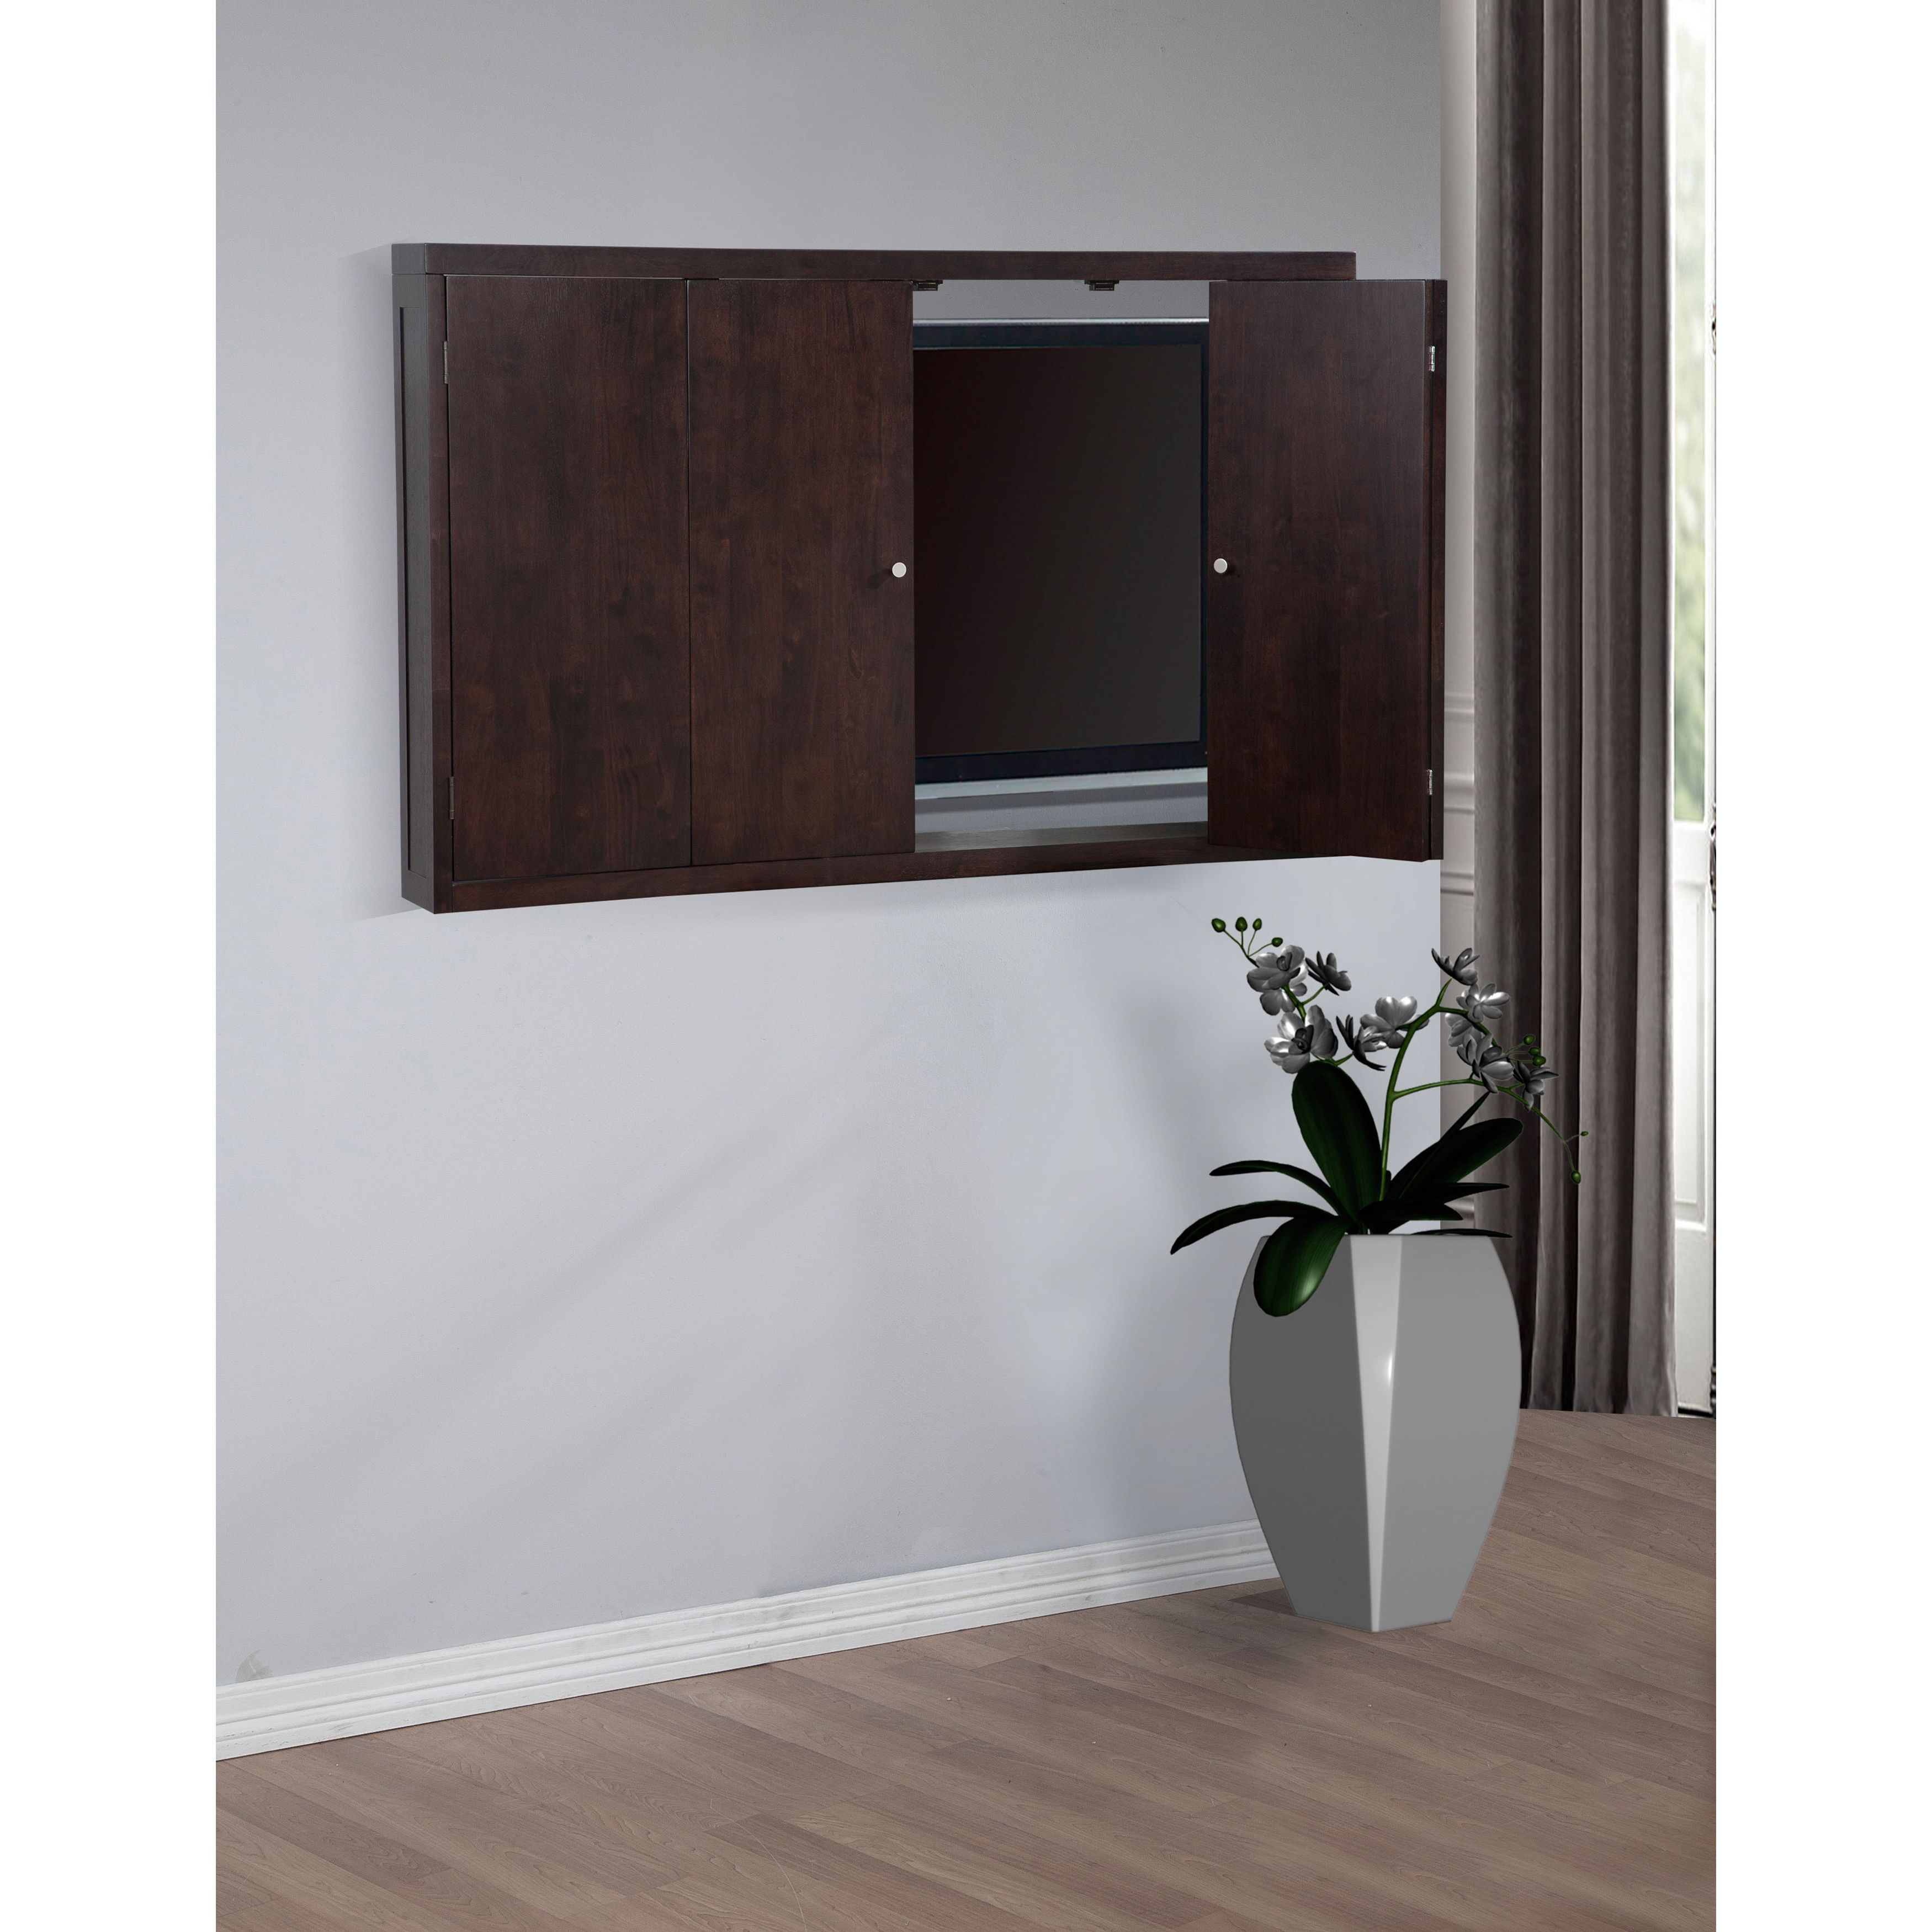 Most Recent Wall Mounted Tv Cabinets For Flat Screens With Doors Within This Sharp Looking, Tv Wall Mount Cabinet Is A Great Way To Store (Photo 6 of 20)